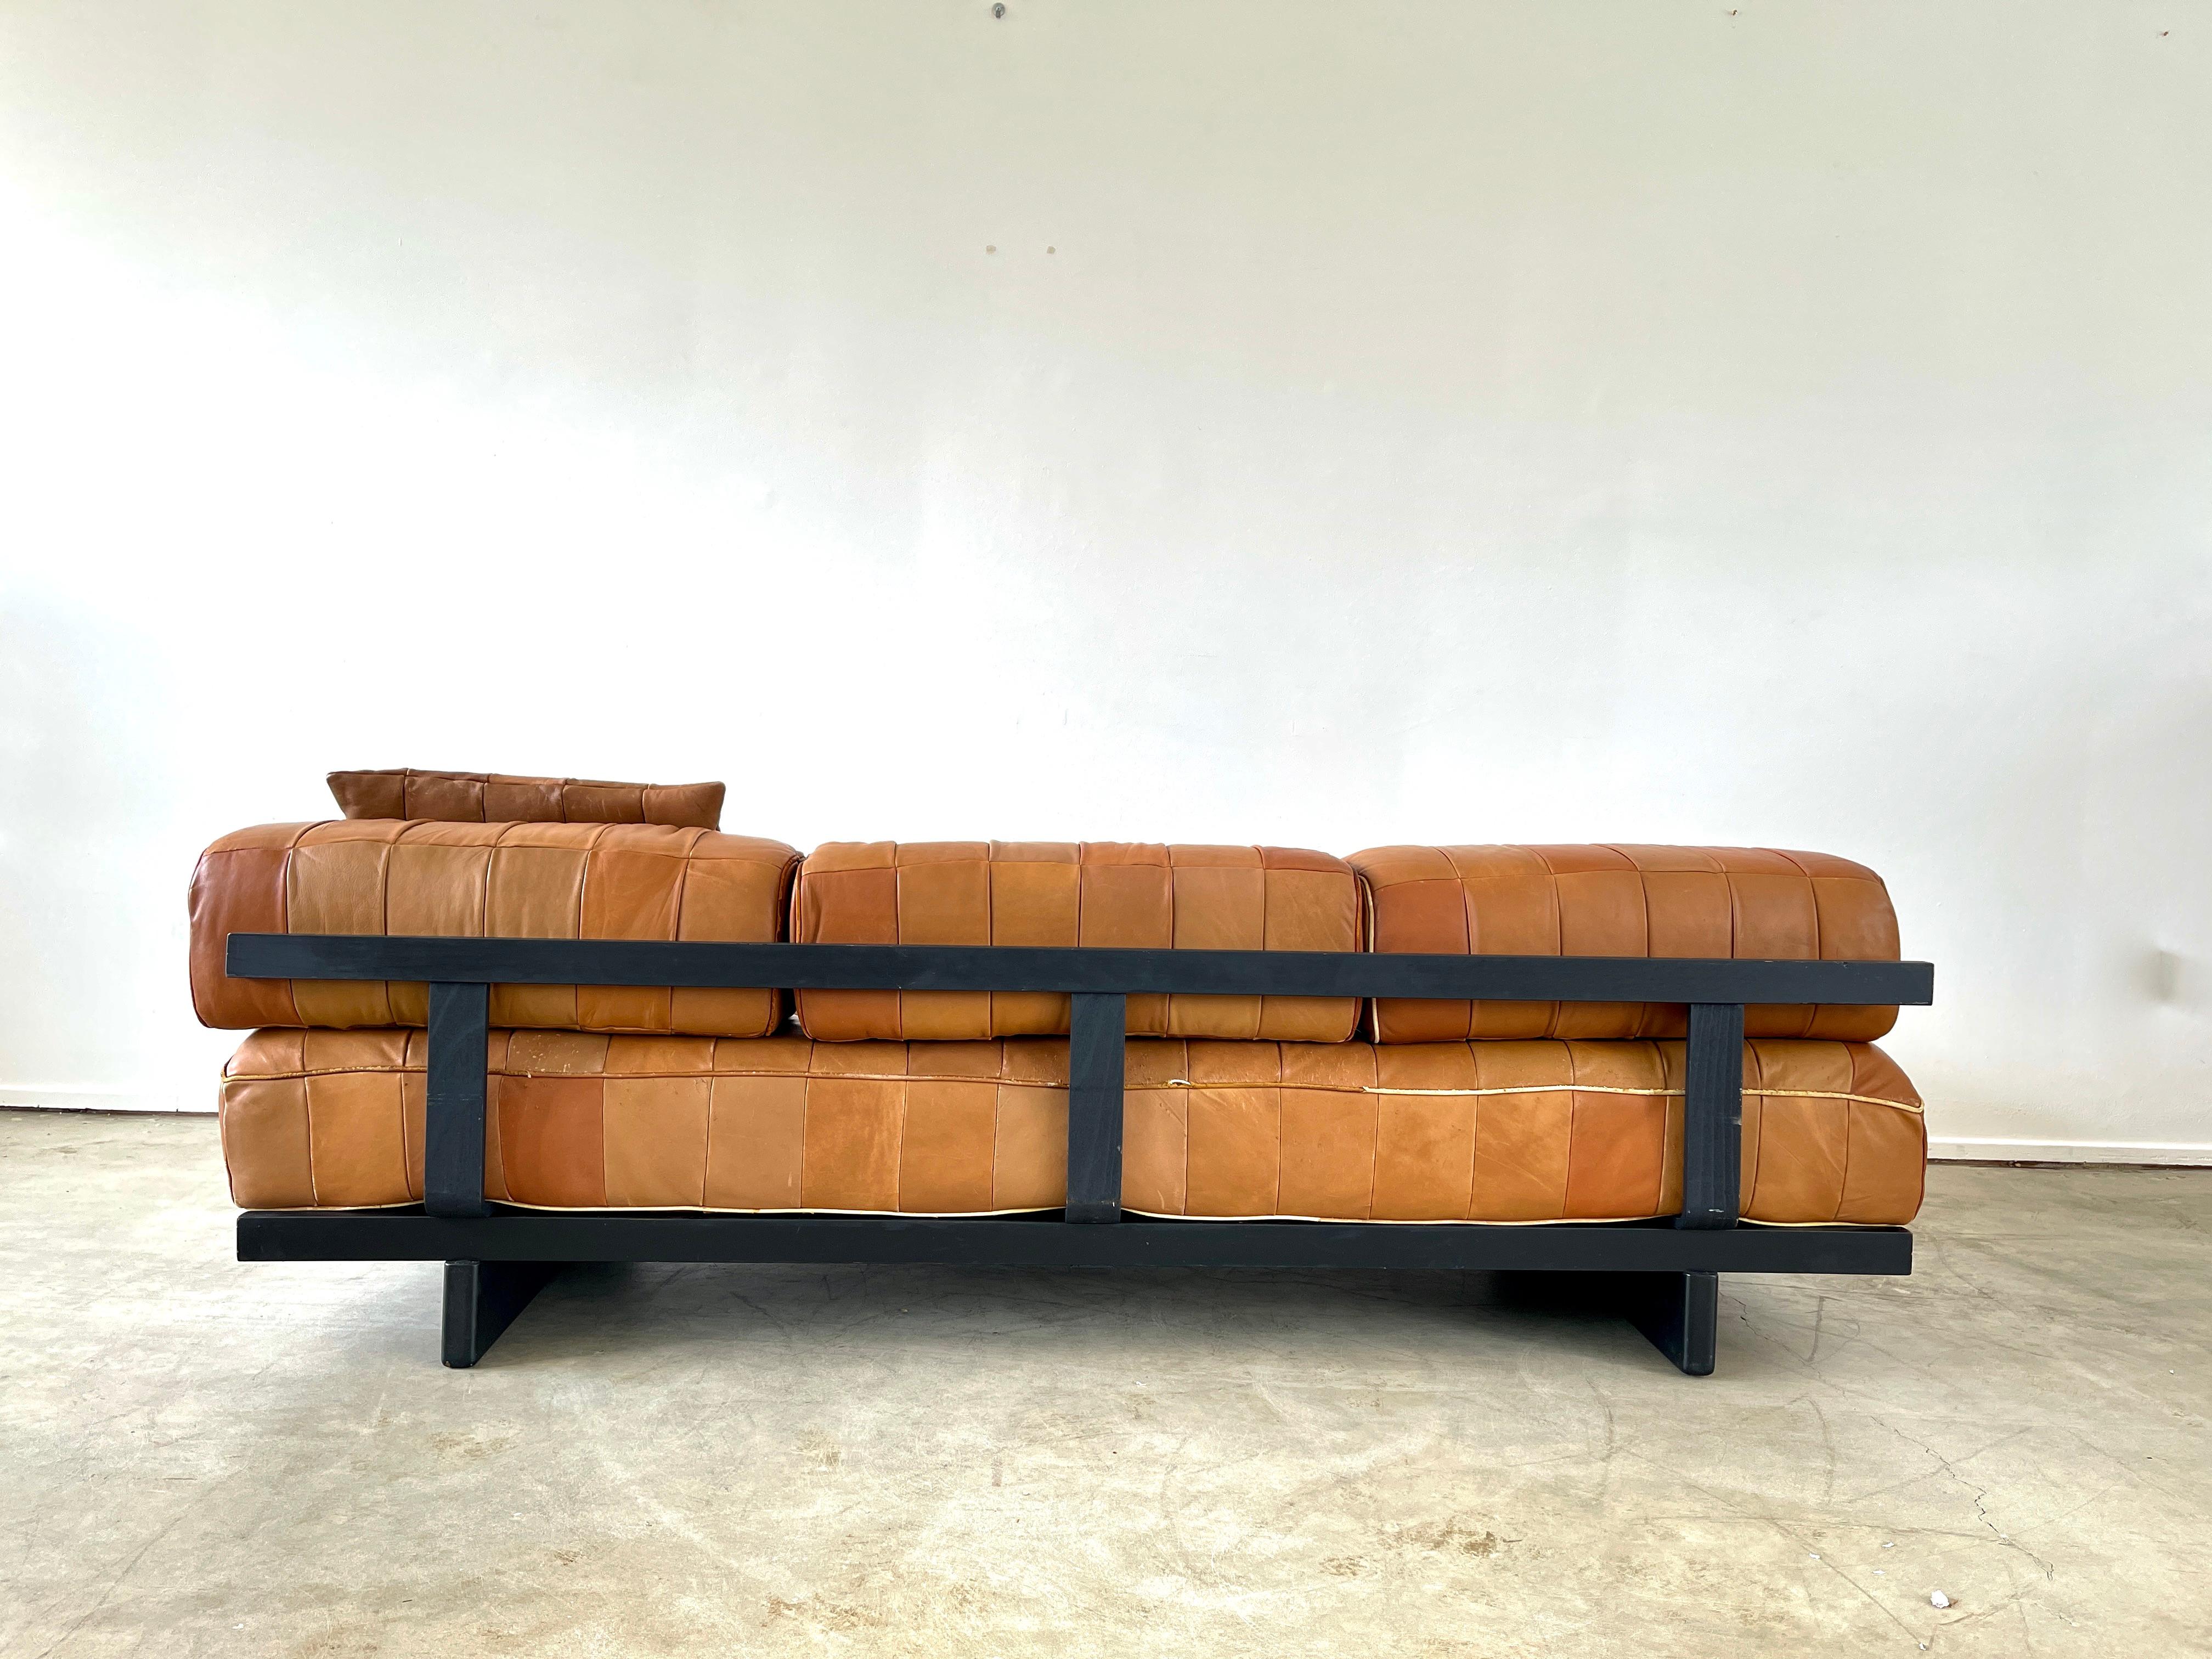 Late 20th Century De Sede Daybed